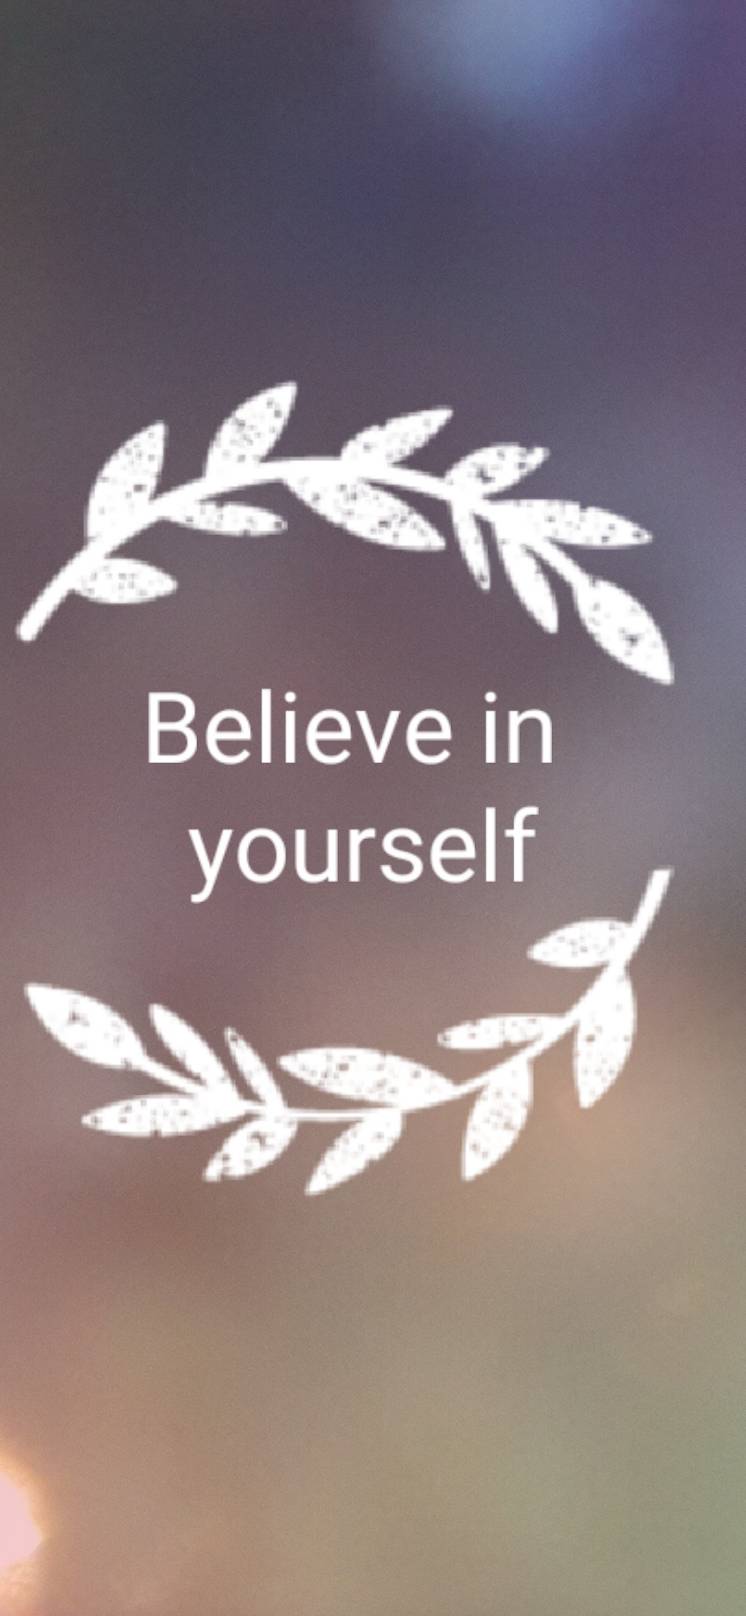 Be yourself HD wallpapers free download  Wallpaperbetter